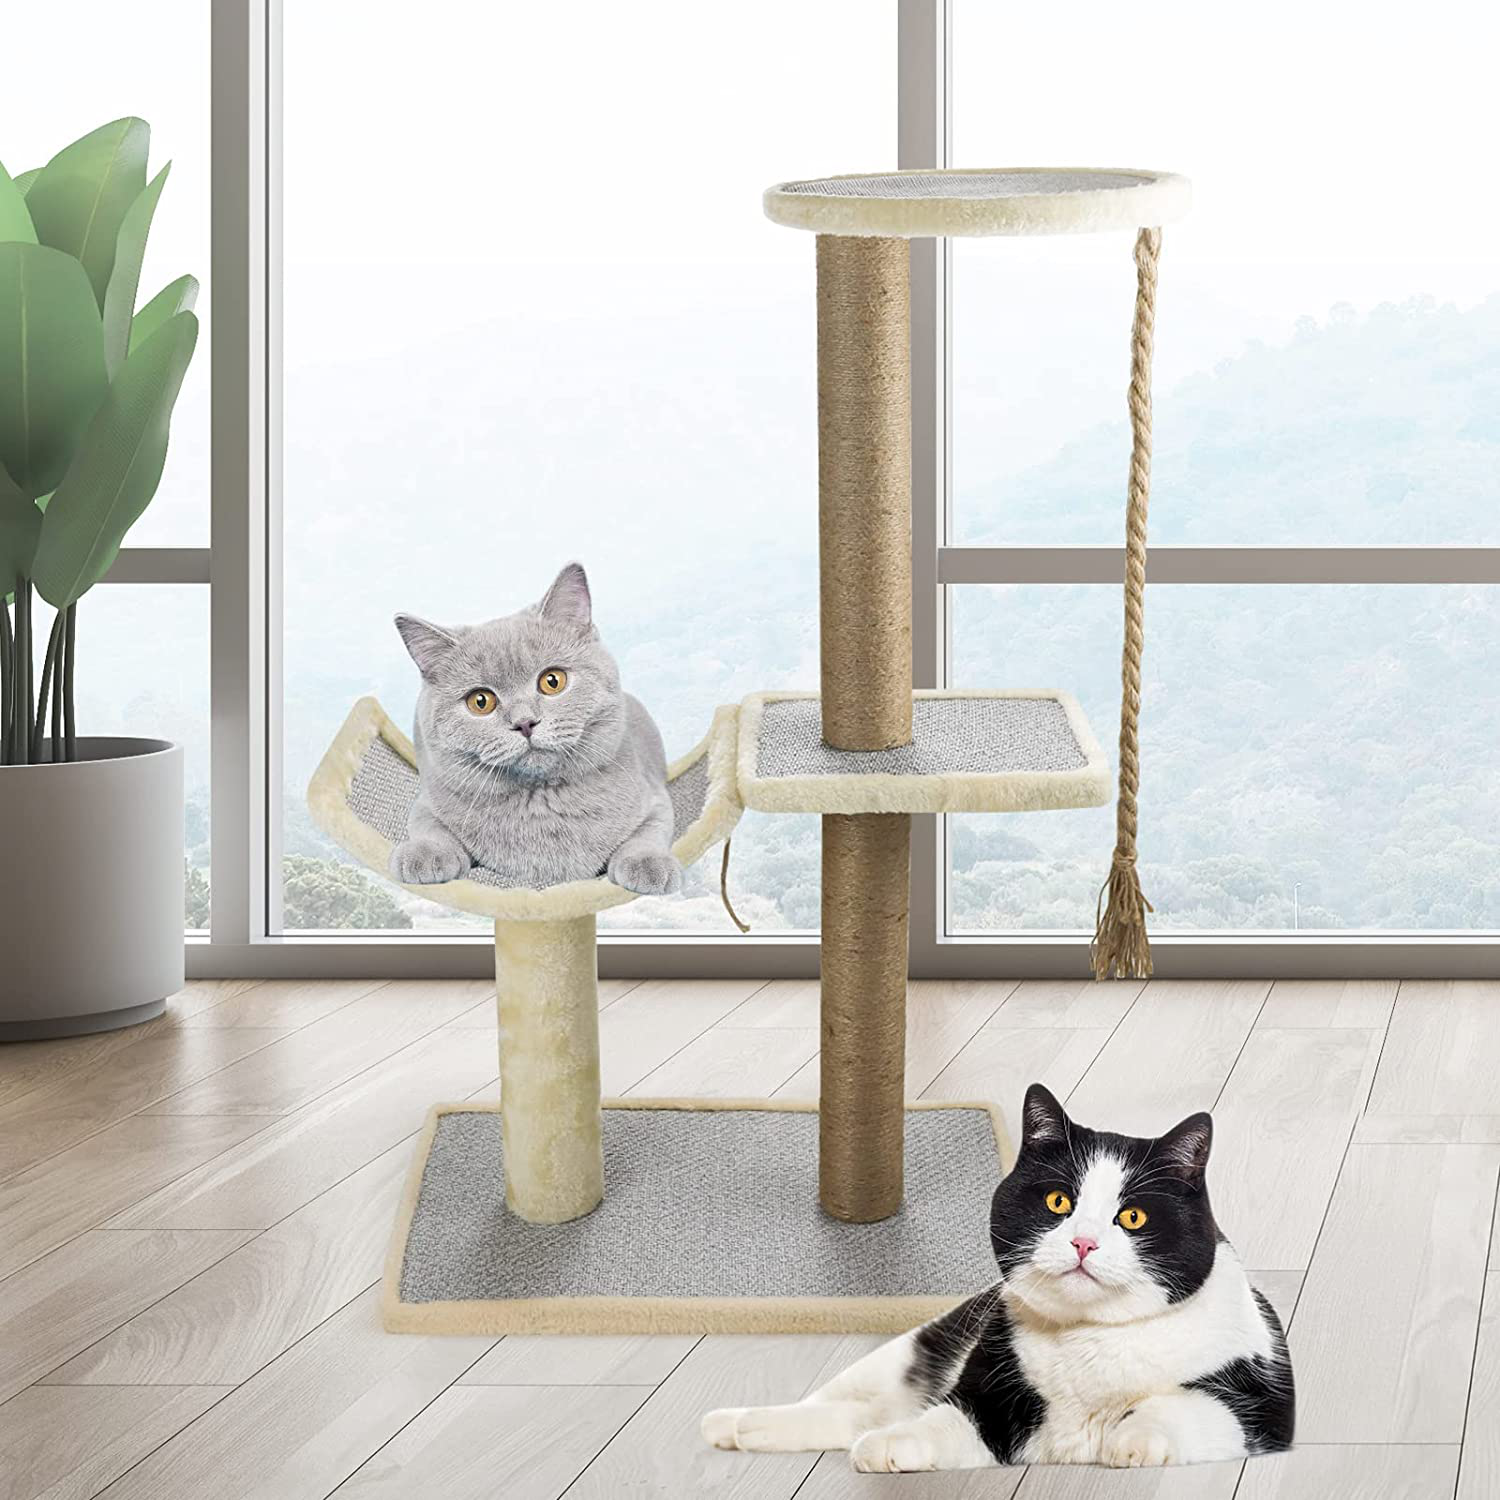 Sfozstra Multi-Level Cat Tree, Cat Climbing Frame with Plush Perches, Cat Jumping Platform Furniture Scratching Post for Playing, Relaxing and Sleeping, Suitable for Cats and Other Pets